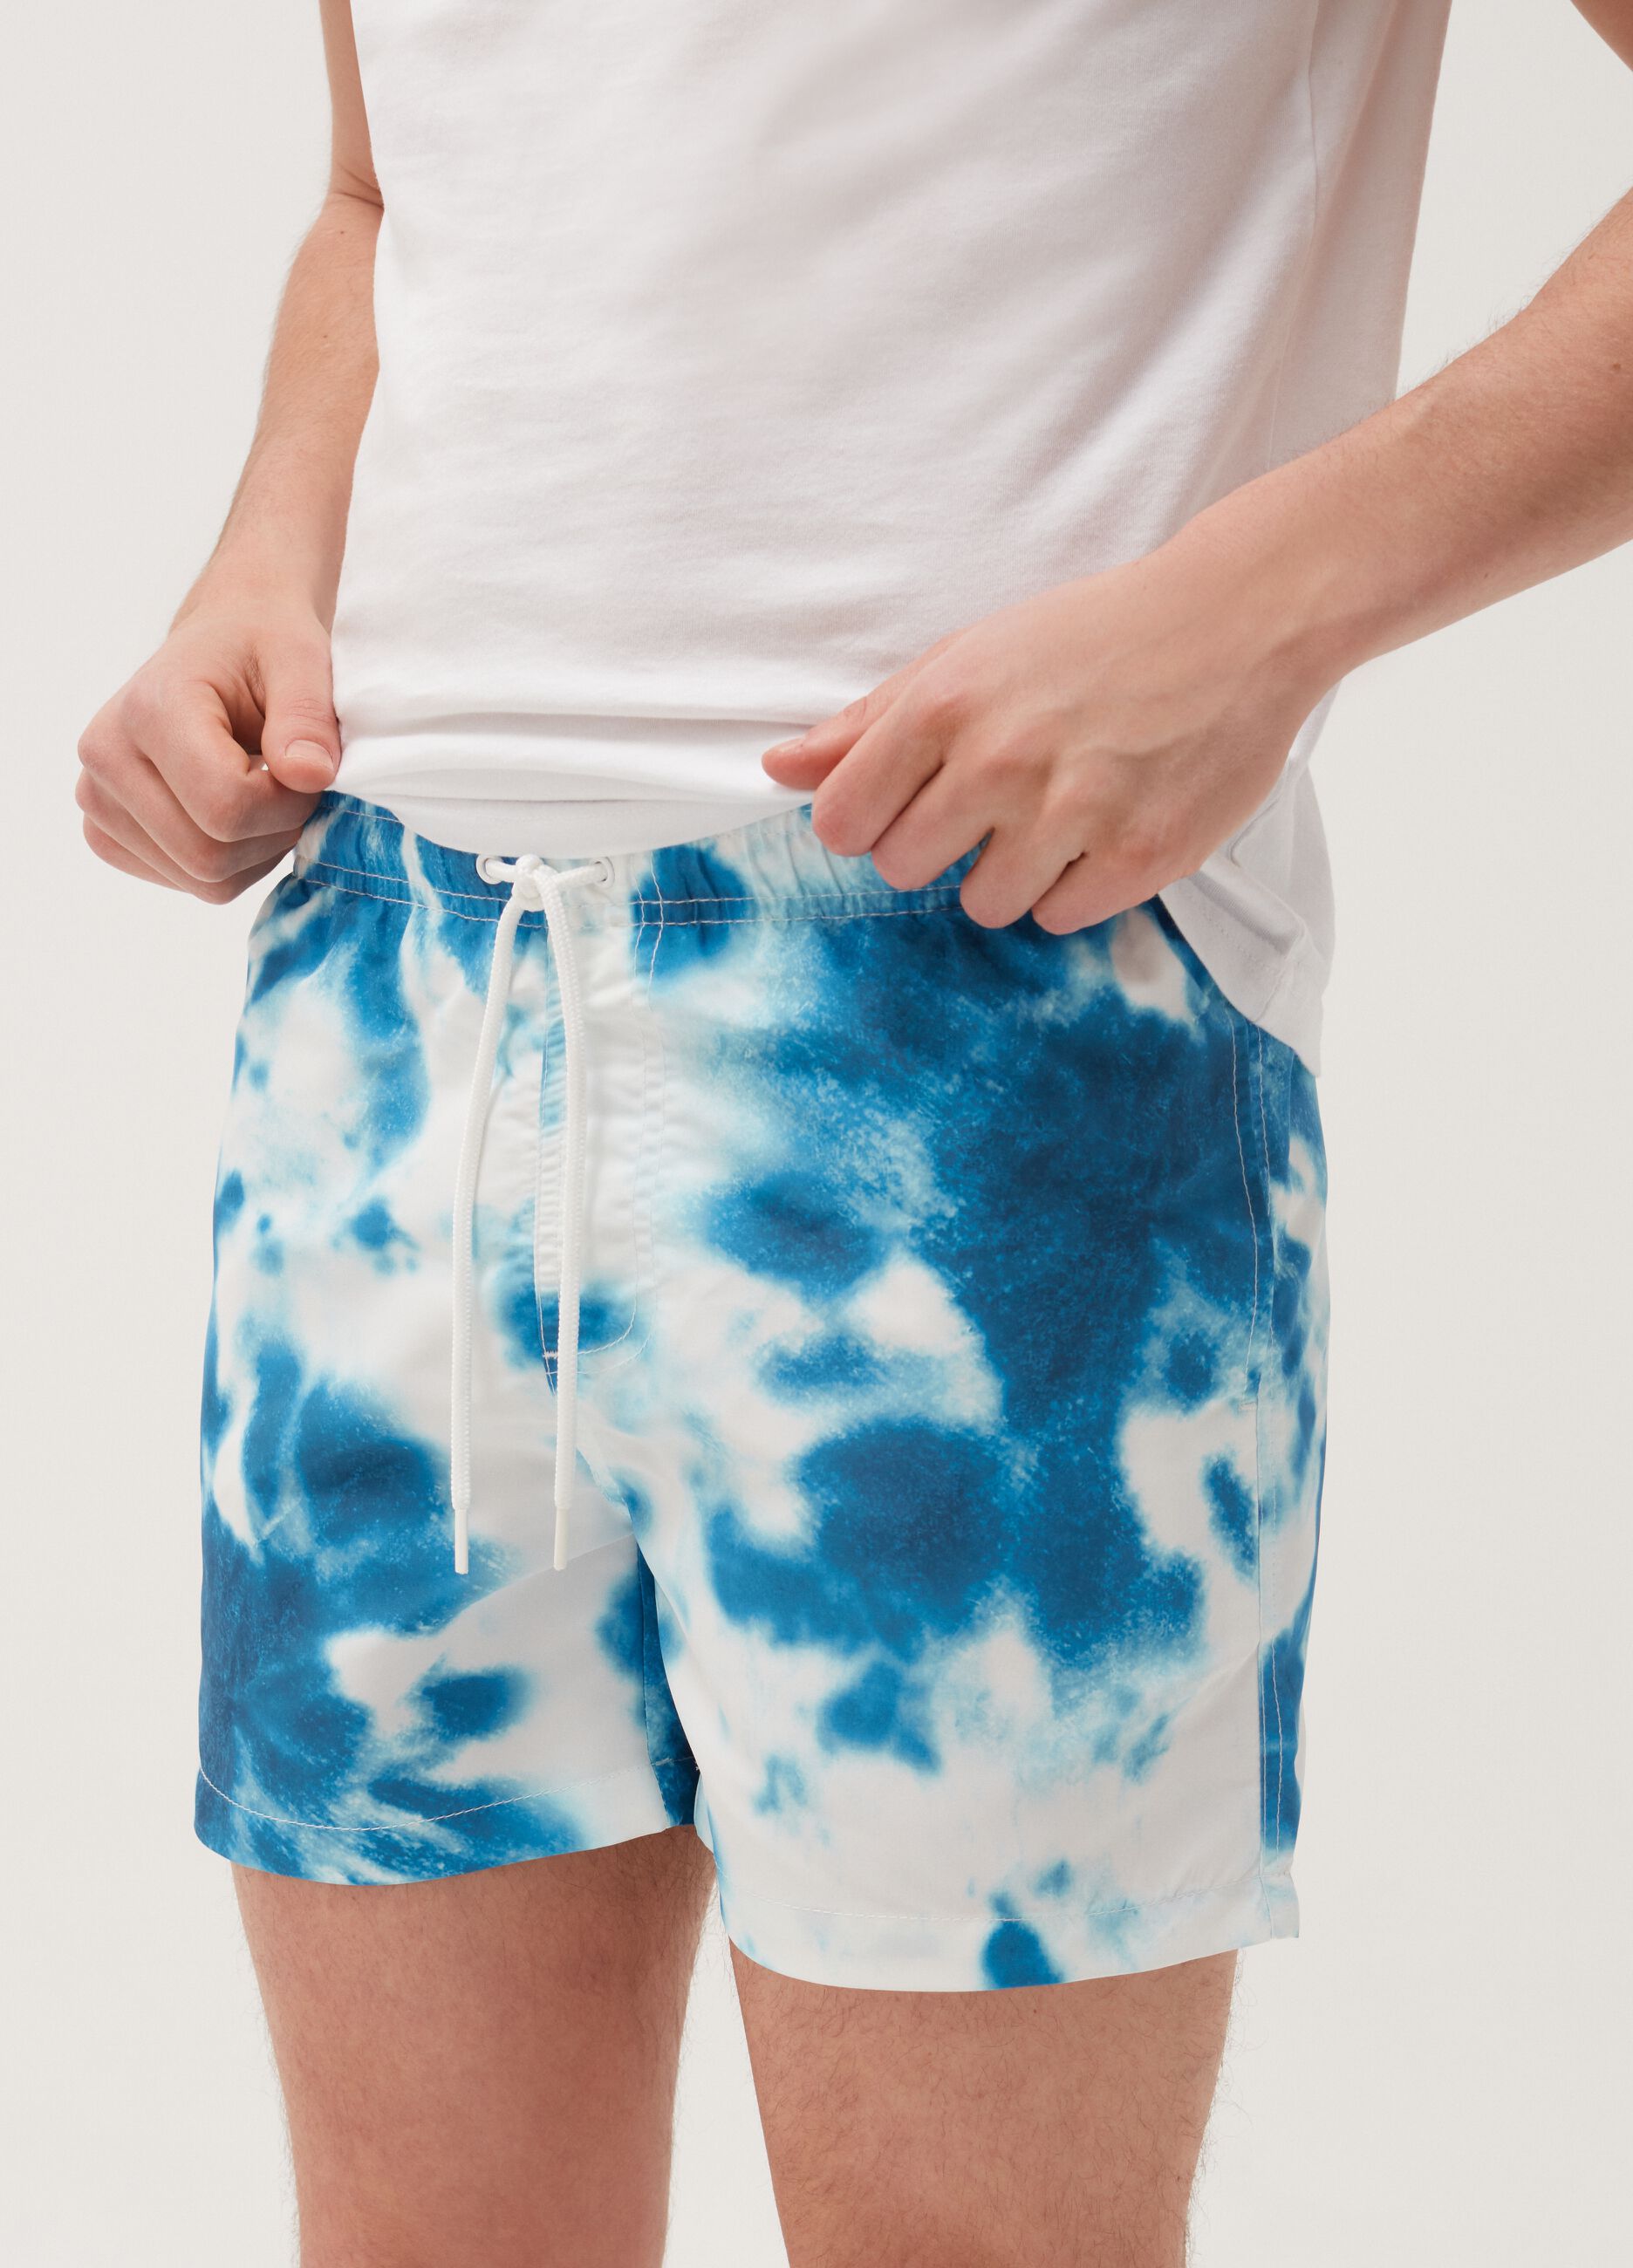 Swimming trunks with Tie & Dye pattern